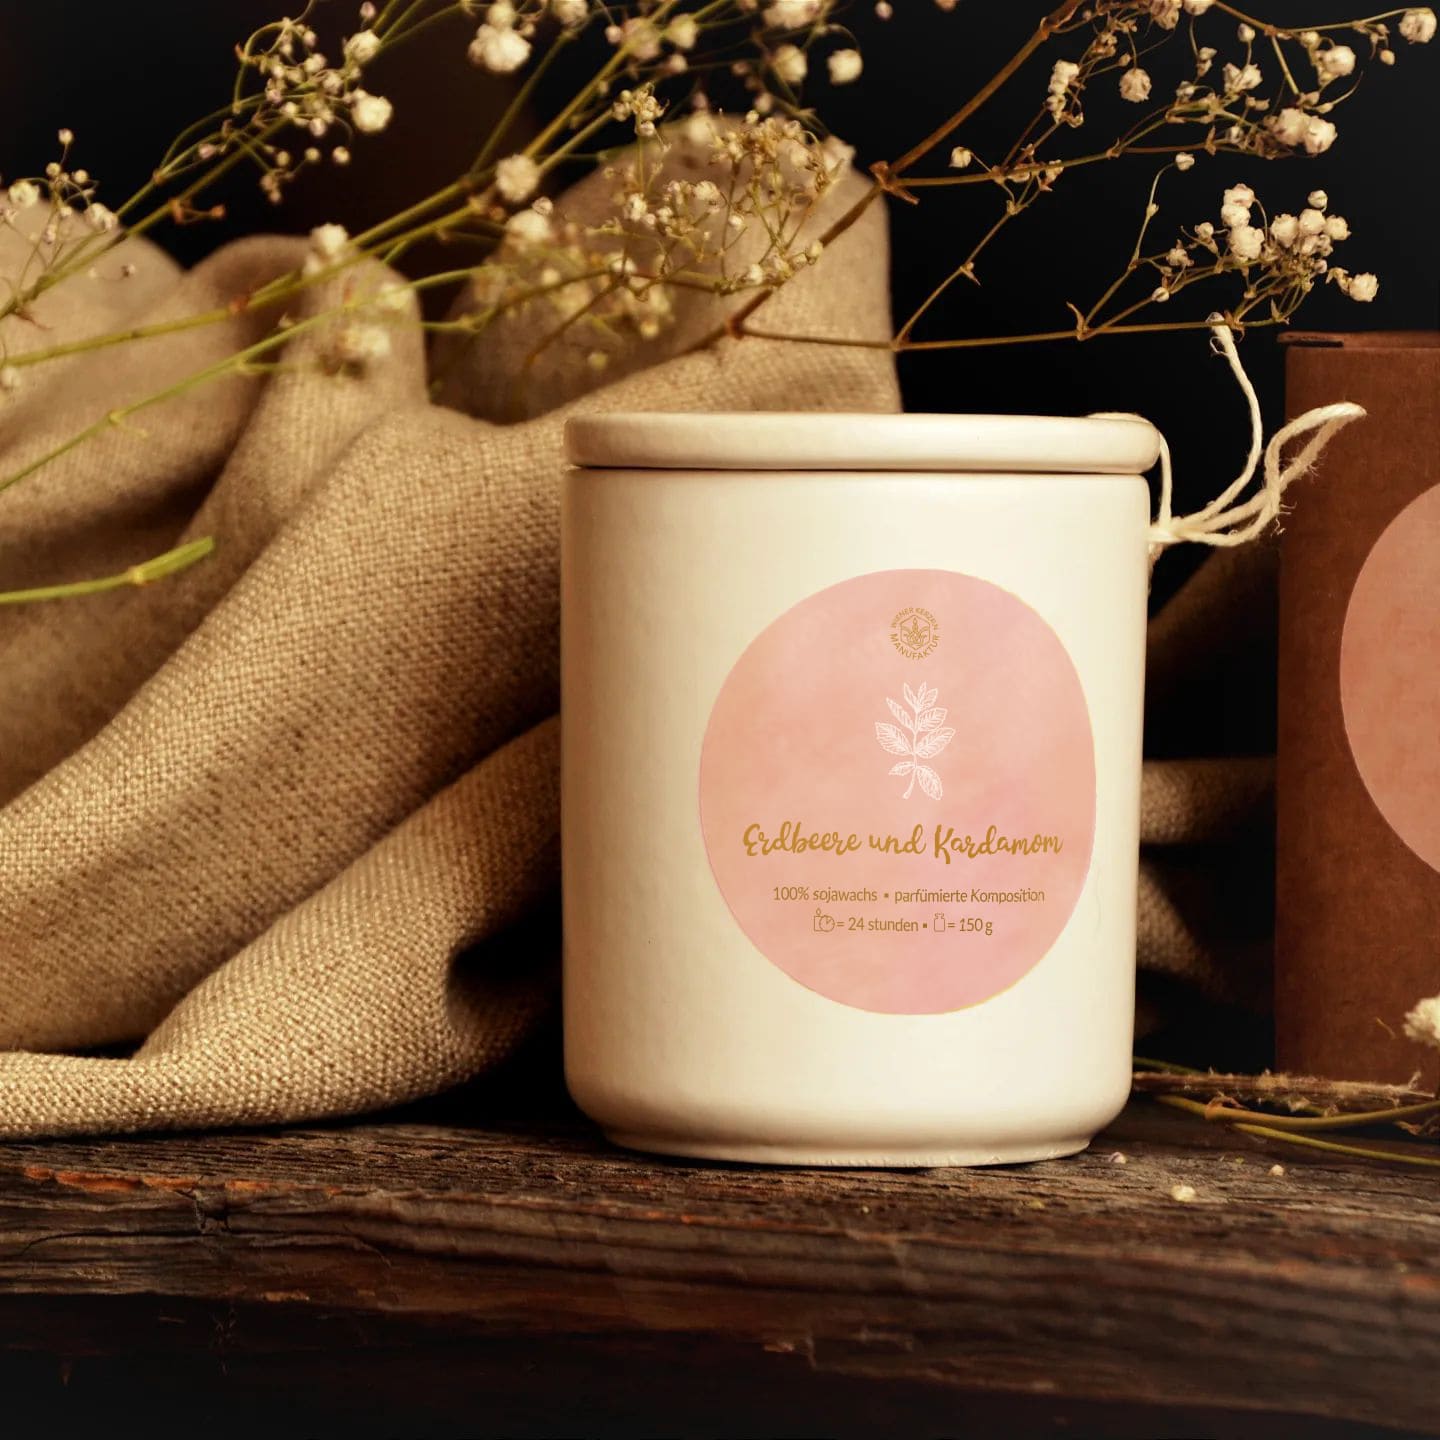 Soy-wax candle with “Strawberry & Cardamom” aroma